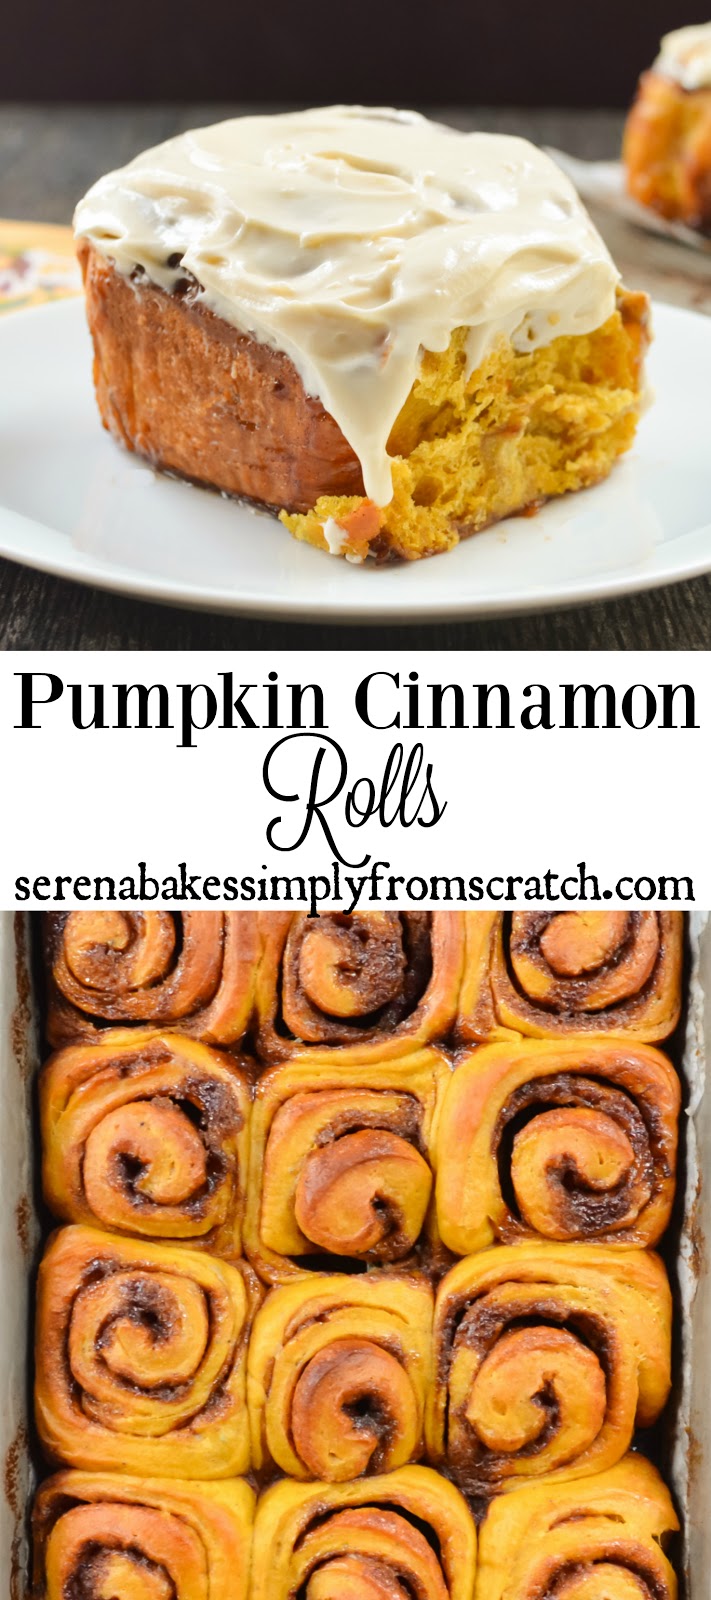 Pumpkin Cinnamon Rolls With Maple Cream Cheese Frosting. So good you won't just eat the center! serenabakessimplyfromscratch.com